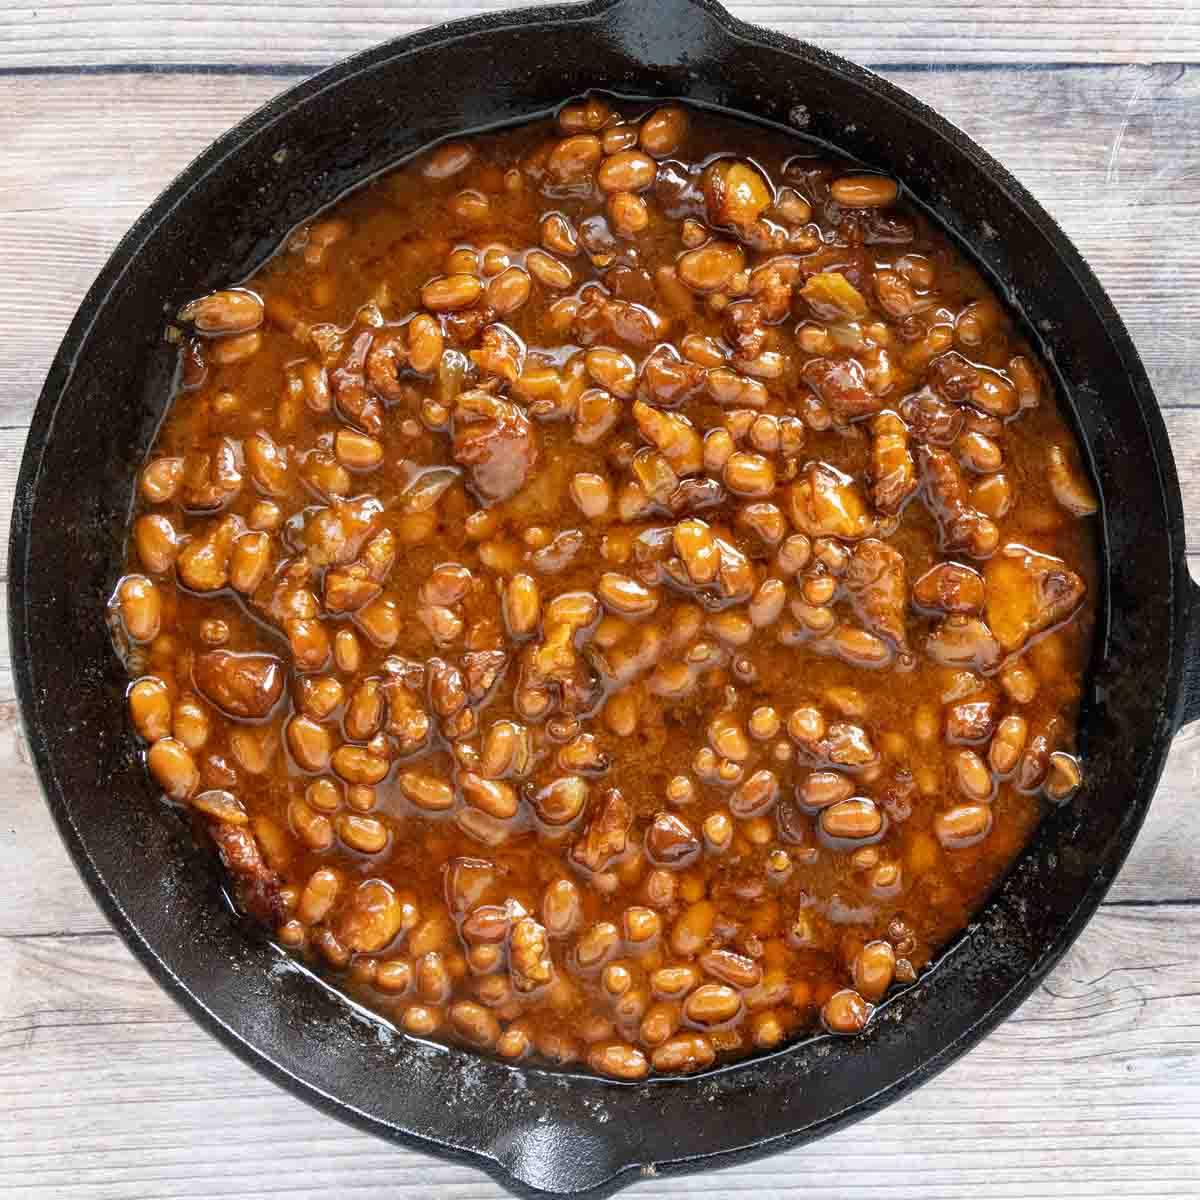 smoked baked beans in a cast iron skillet.